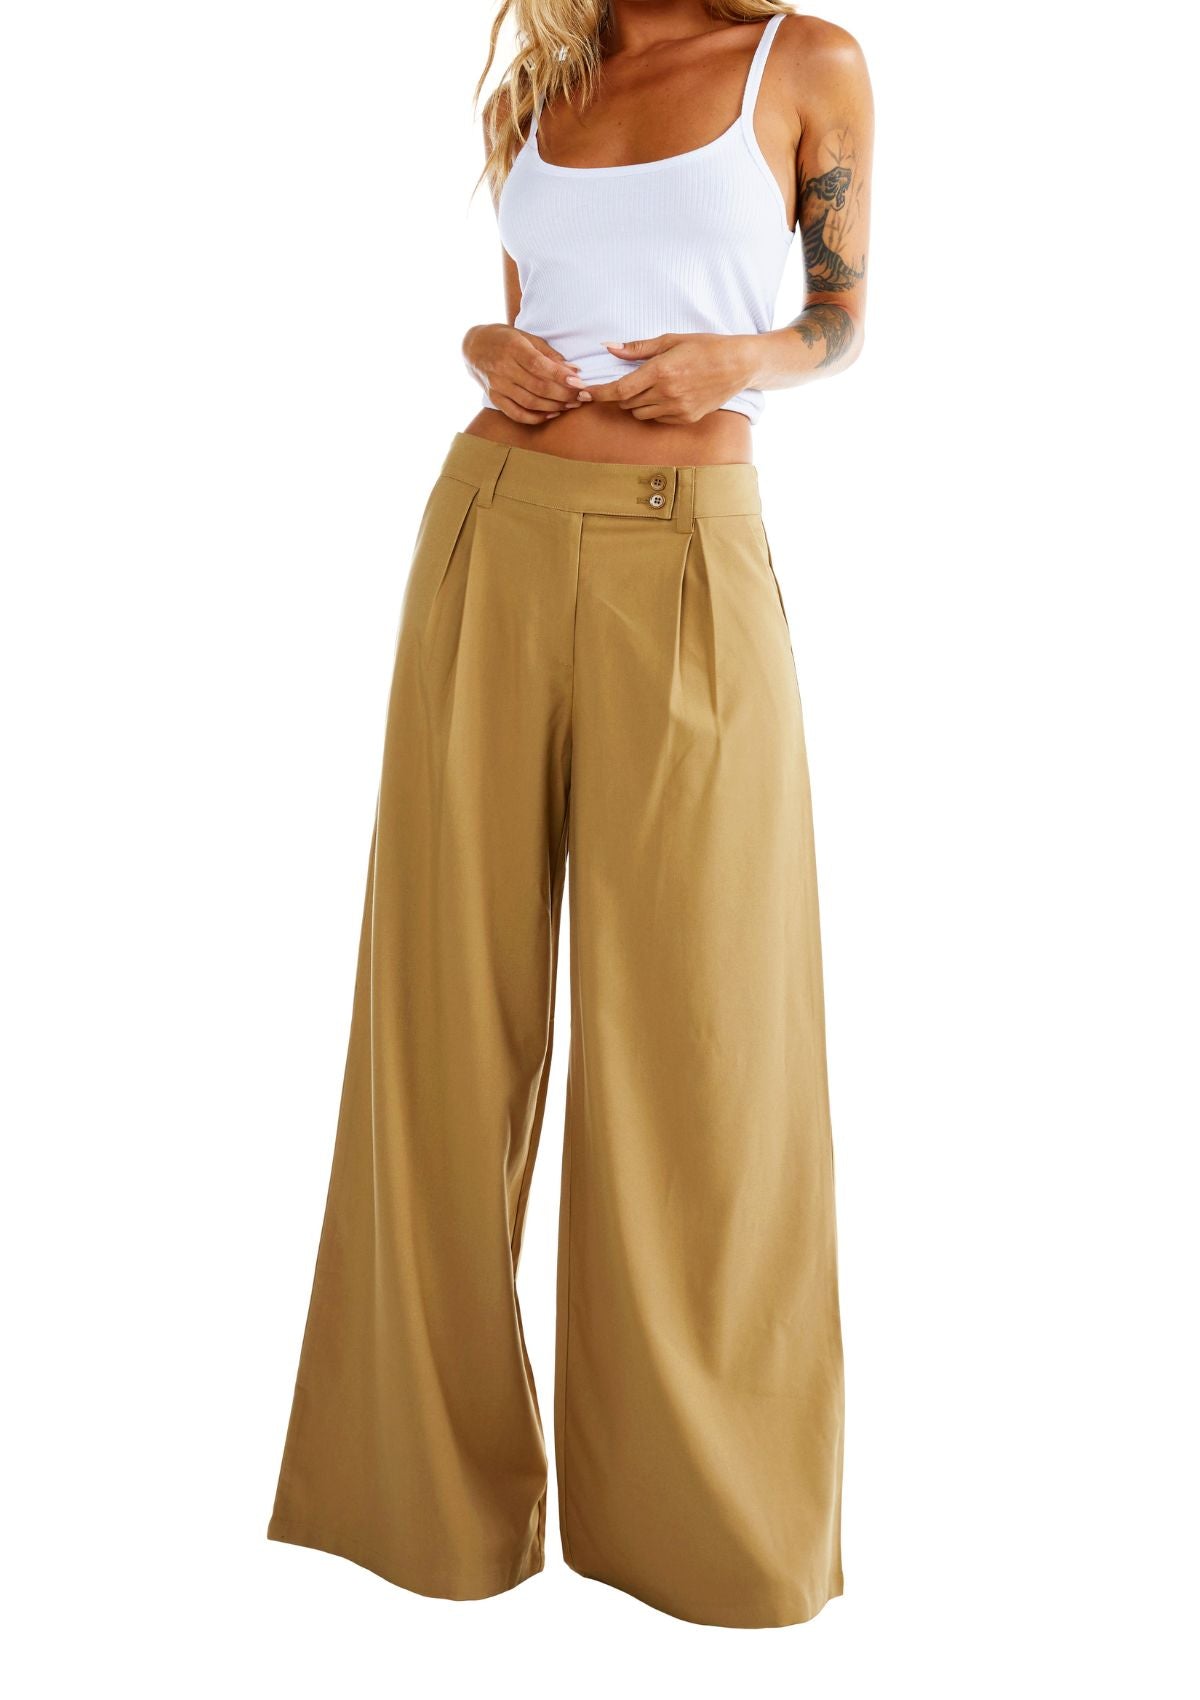 Maeve Low Rise Trouser